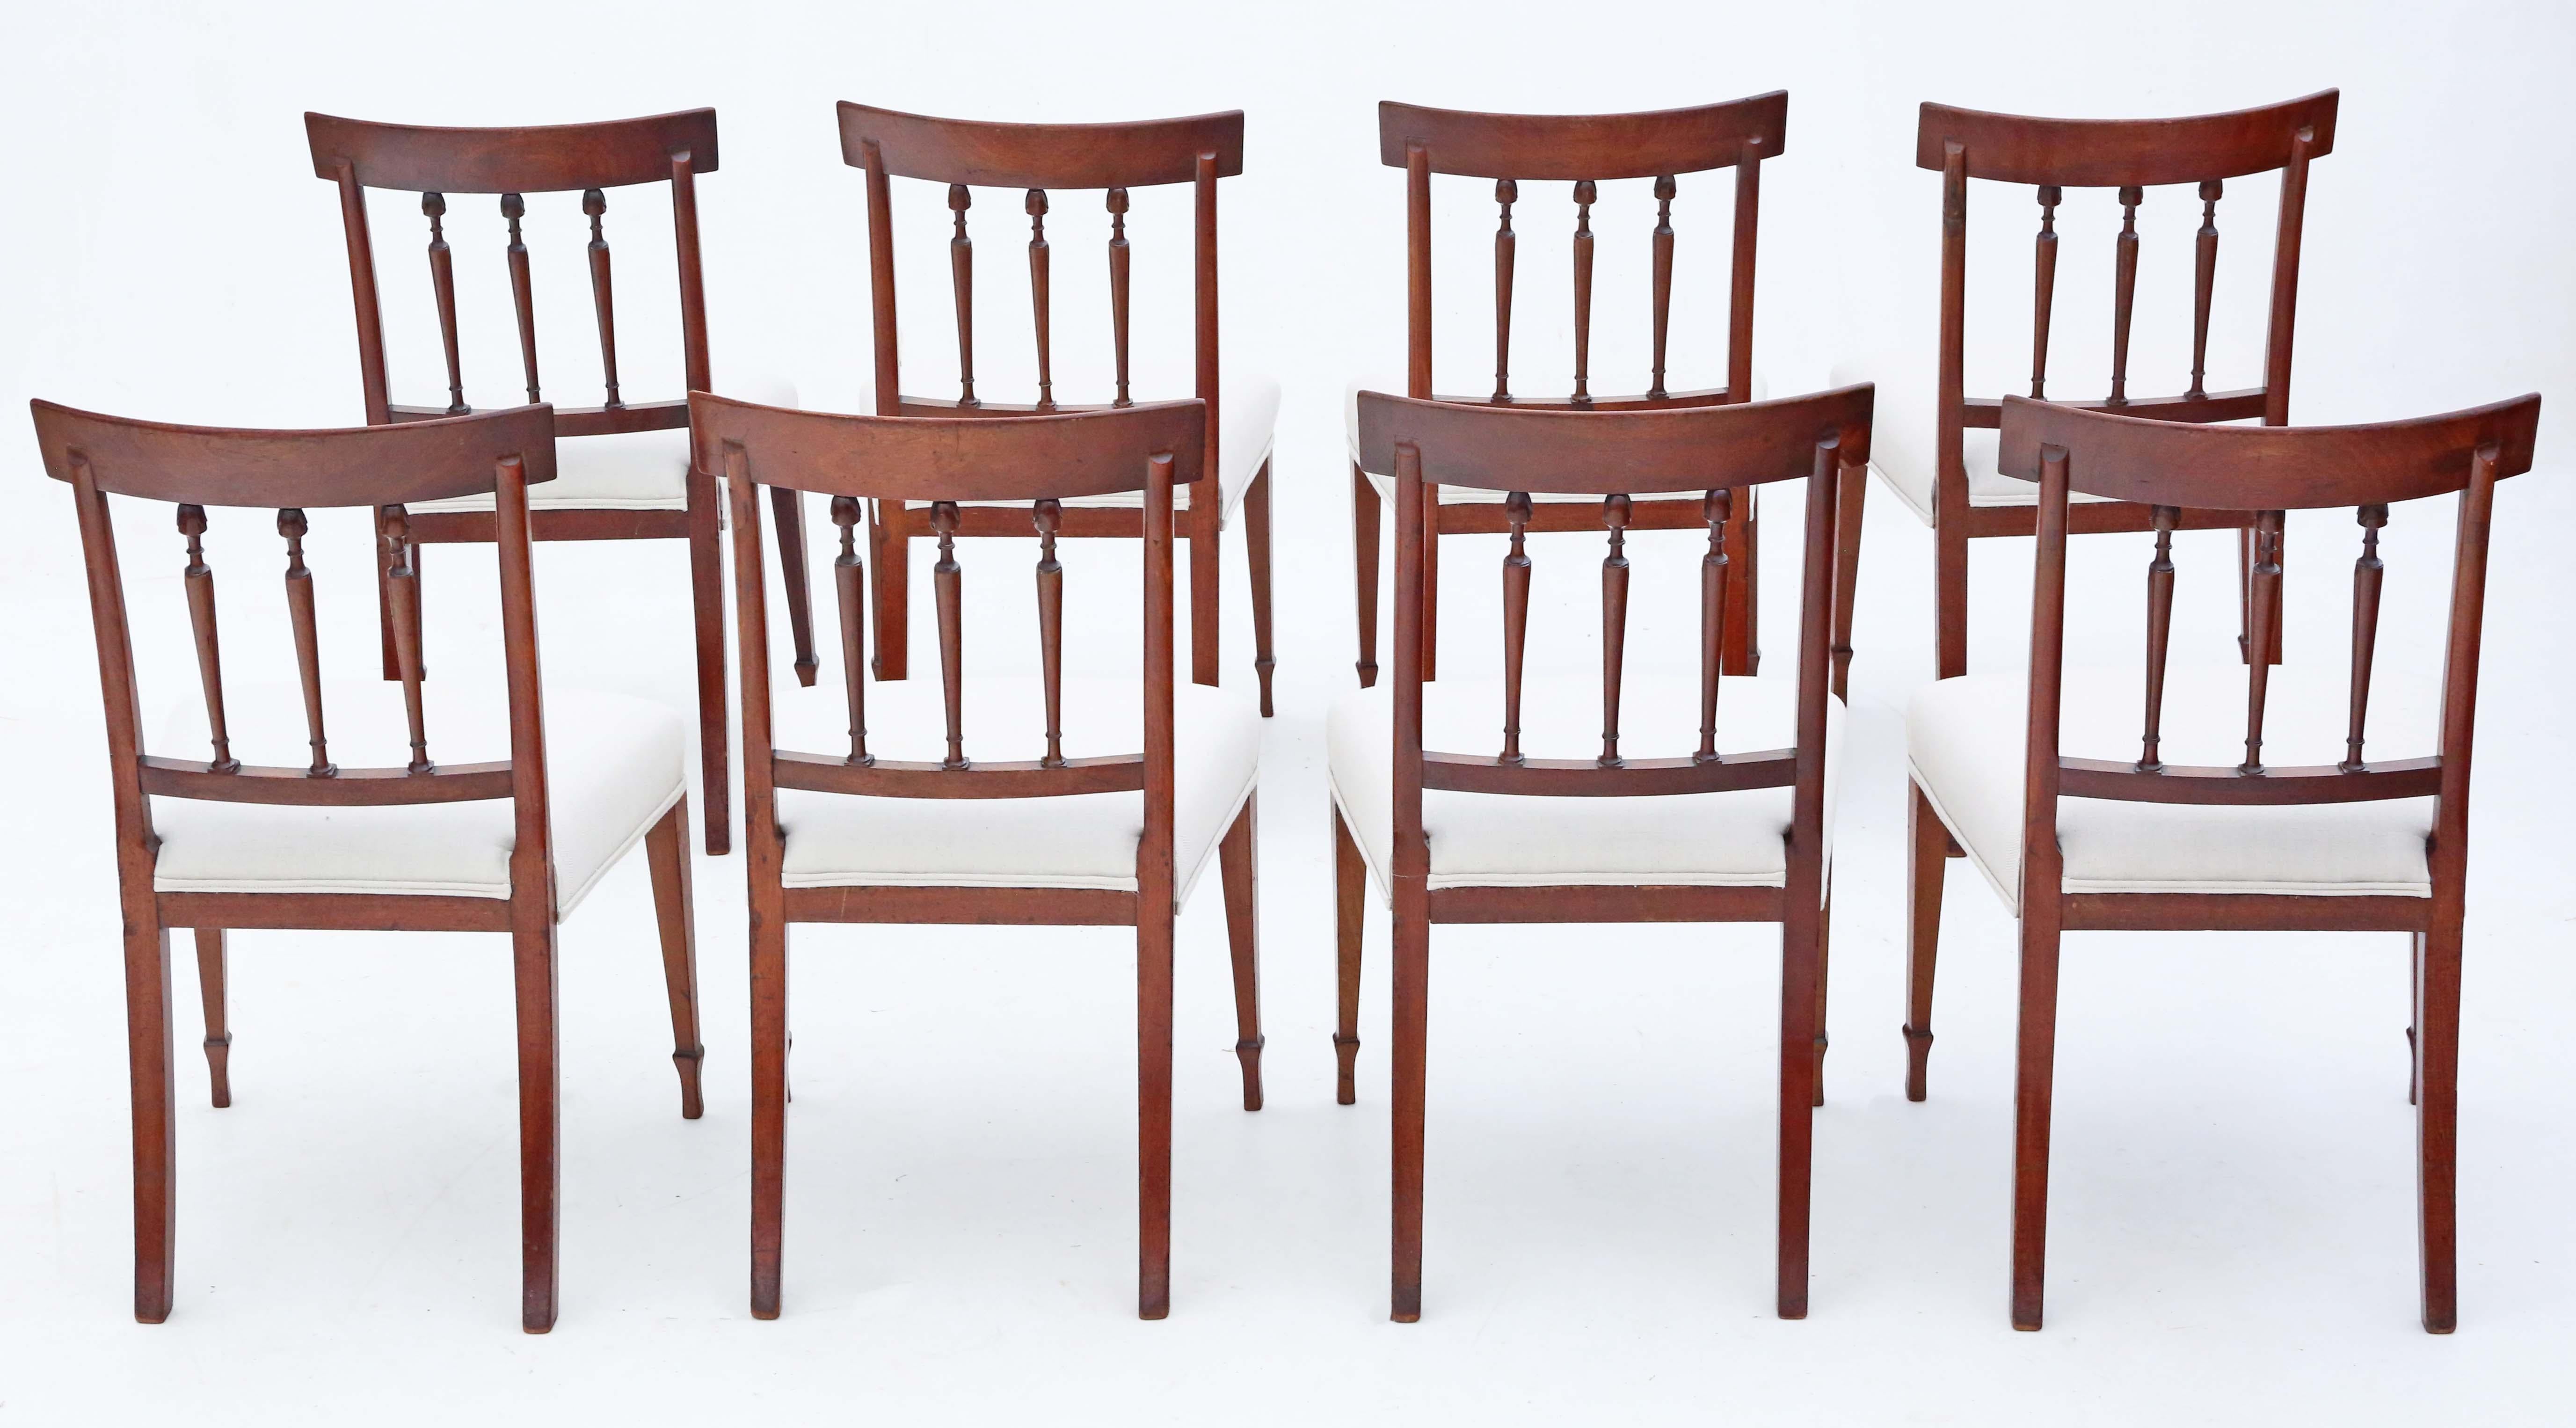 Early 19th Century Mahogany Marquetry Dining Chairs: Set of 8, Antique Quality In Good Condition For Sale In Wisbech, Cambridgeshire